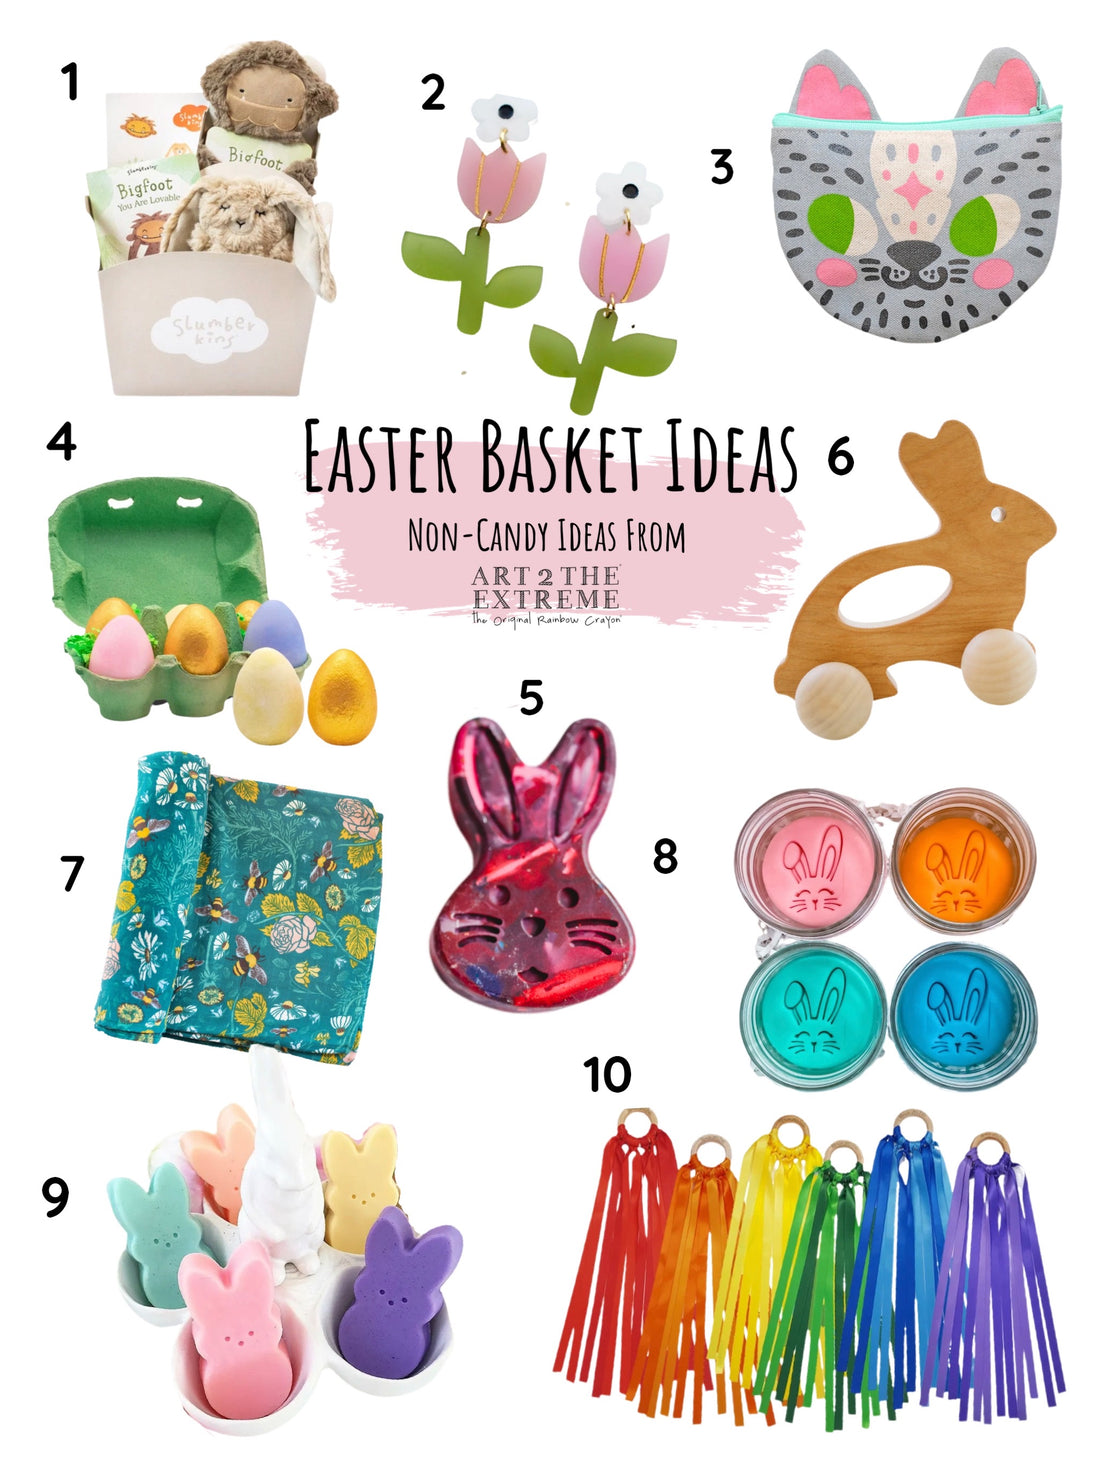 10 of the Best Kids Gifts for Easter (That Aren't Candy!) – Art 2 the  Extreme® - The Original Rainbow Crayon®